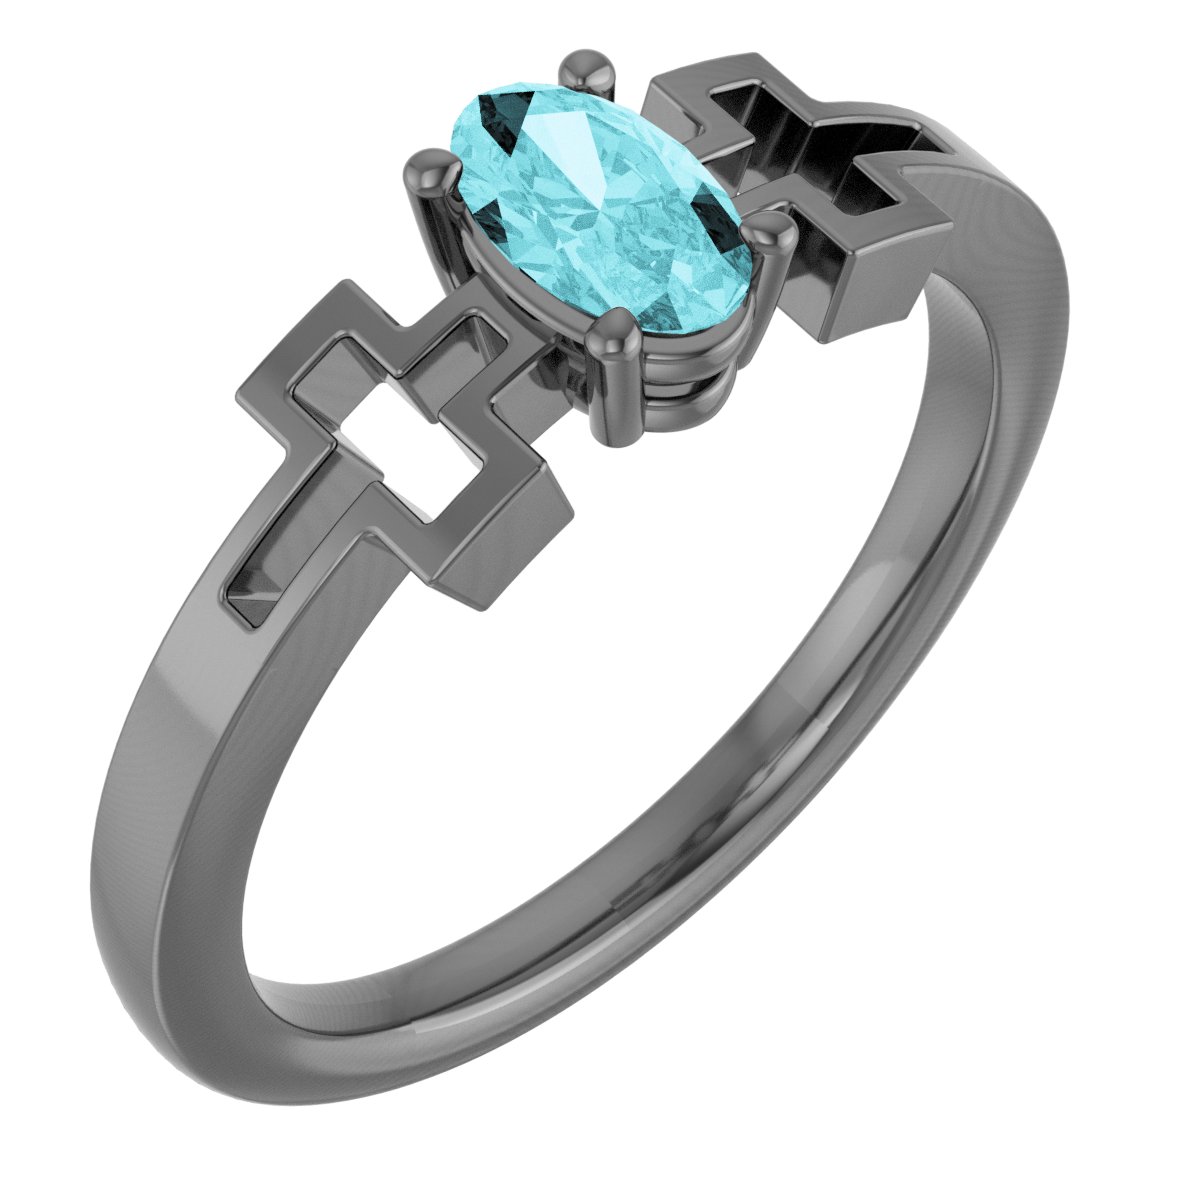 Platinum Blue Zircon Solitaire Cross Youth Ring